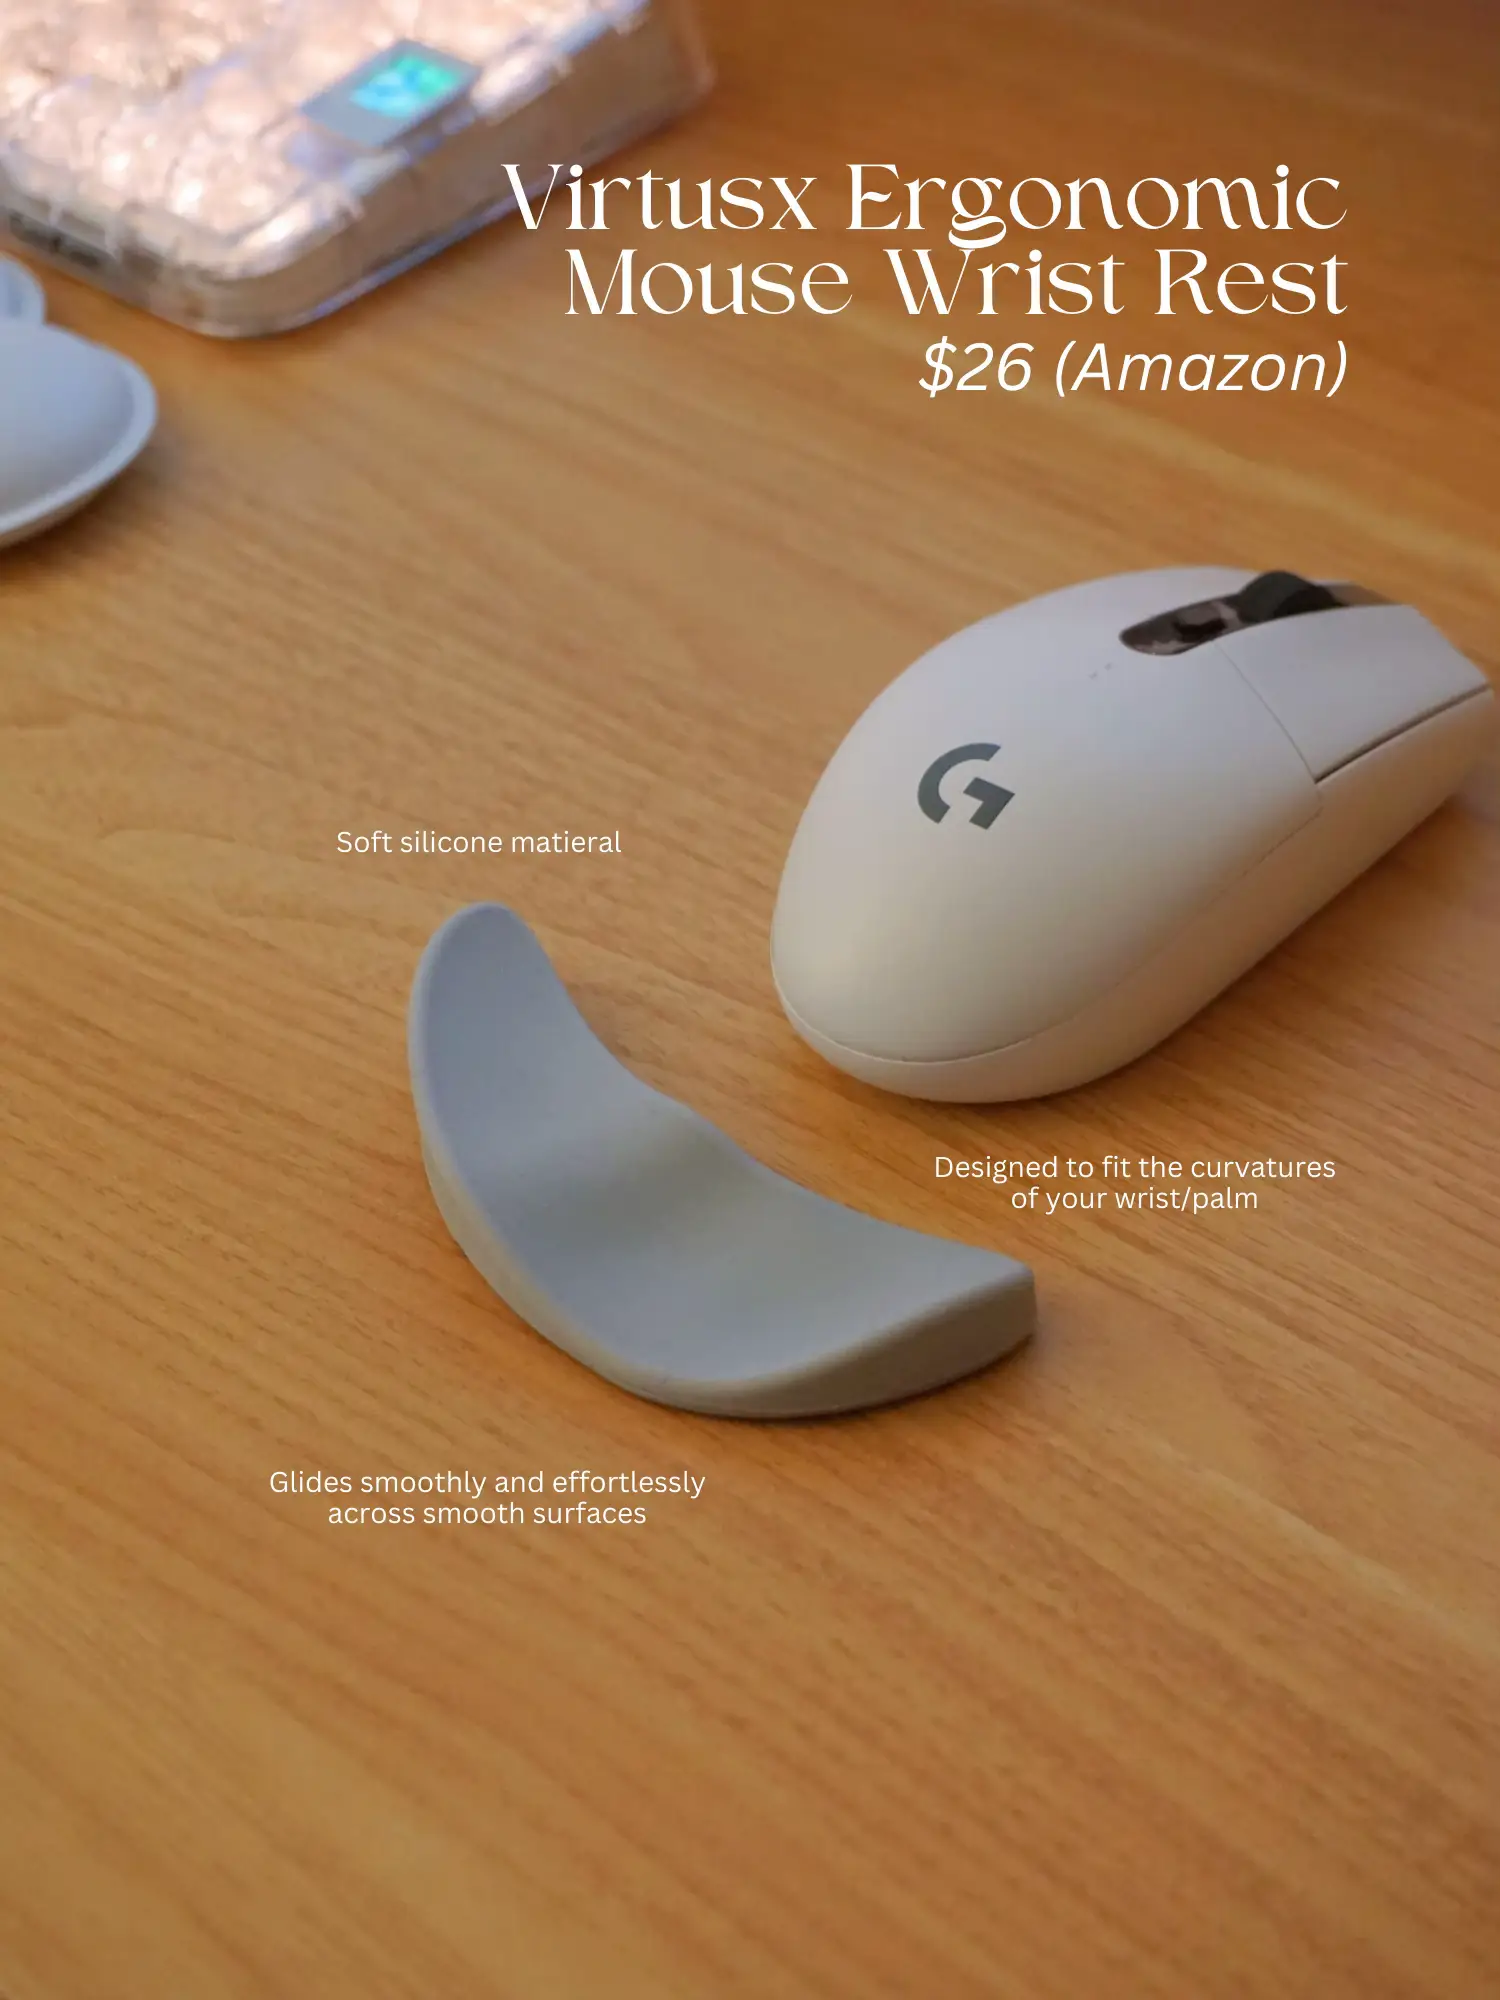 how to choose the perfect ergonomic mouse for your needs - Lemon8 Search